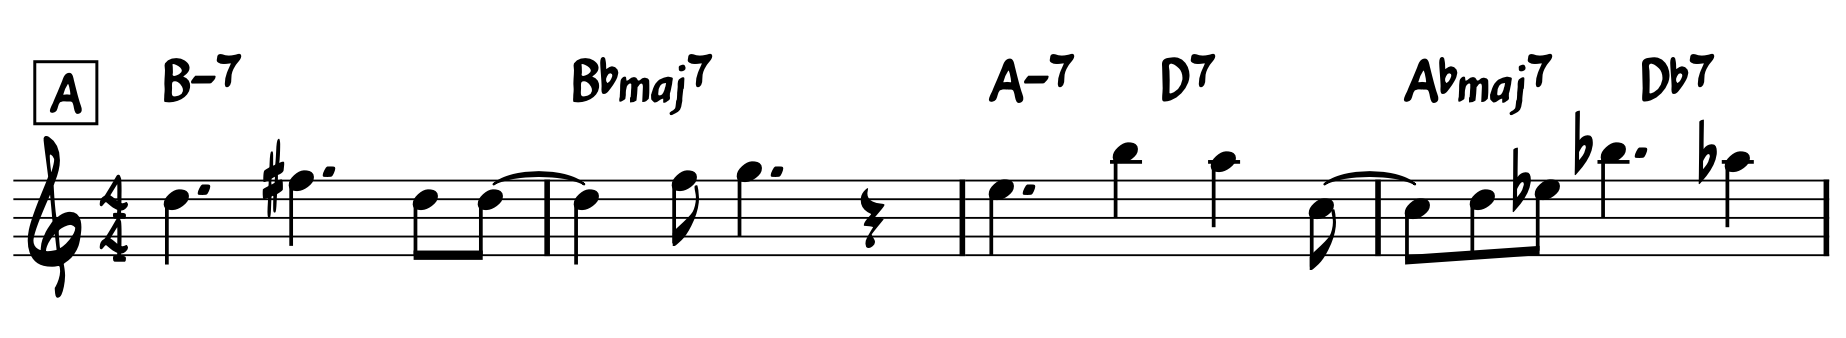 Music notation on a lead sheet that doesn't show beat 3 Is harder to read.